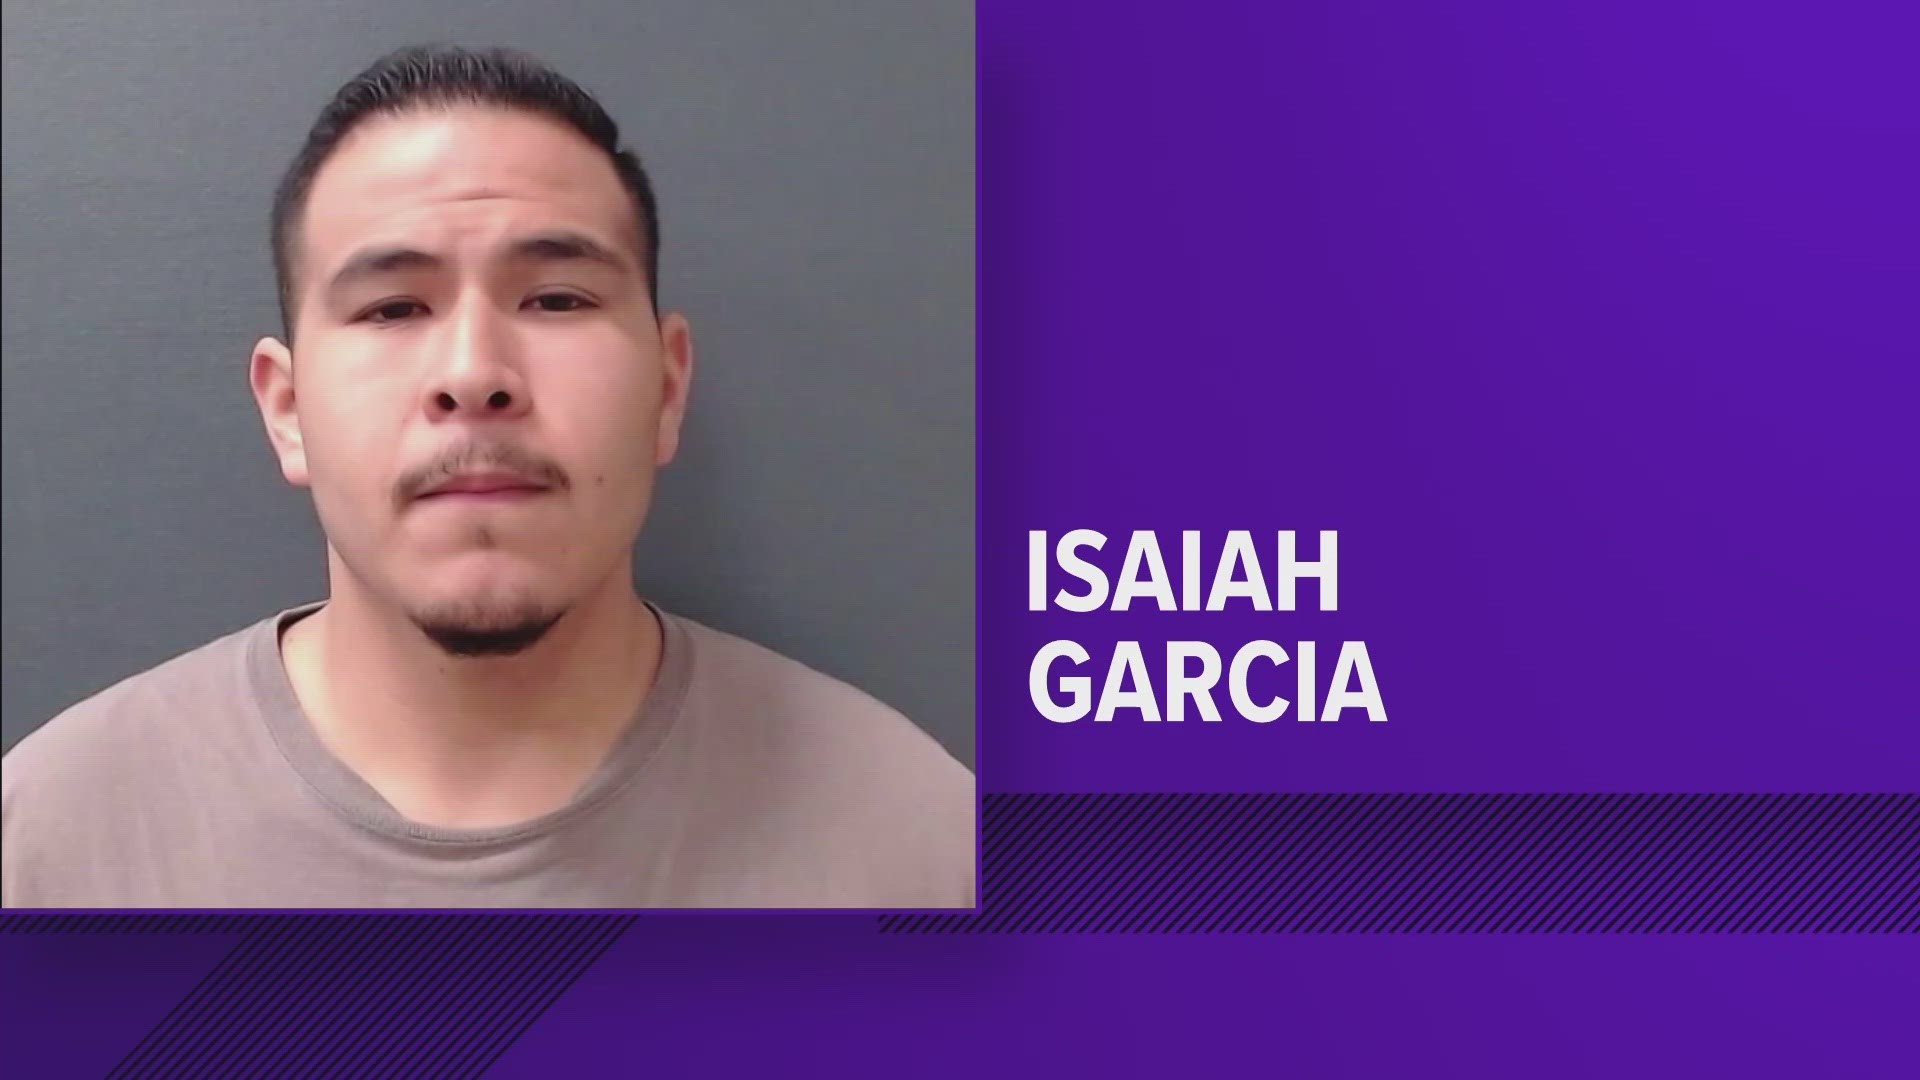 The officer, Isaiah Garcia, has been indicted on a felony charge of deadly conduct.